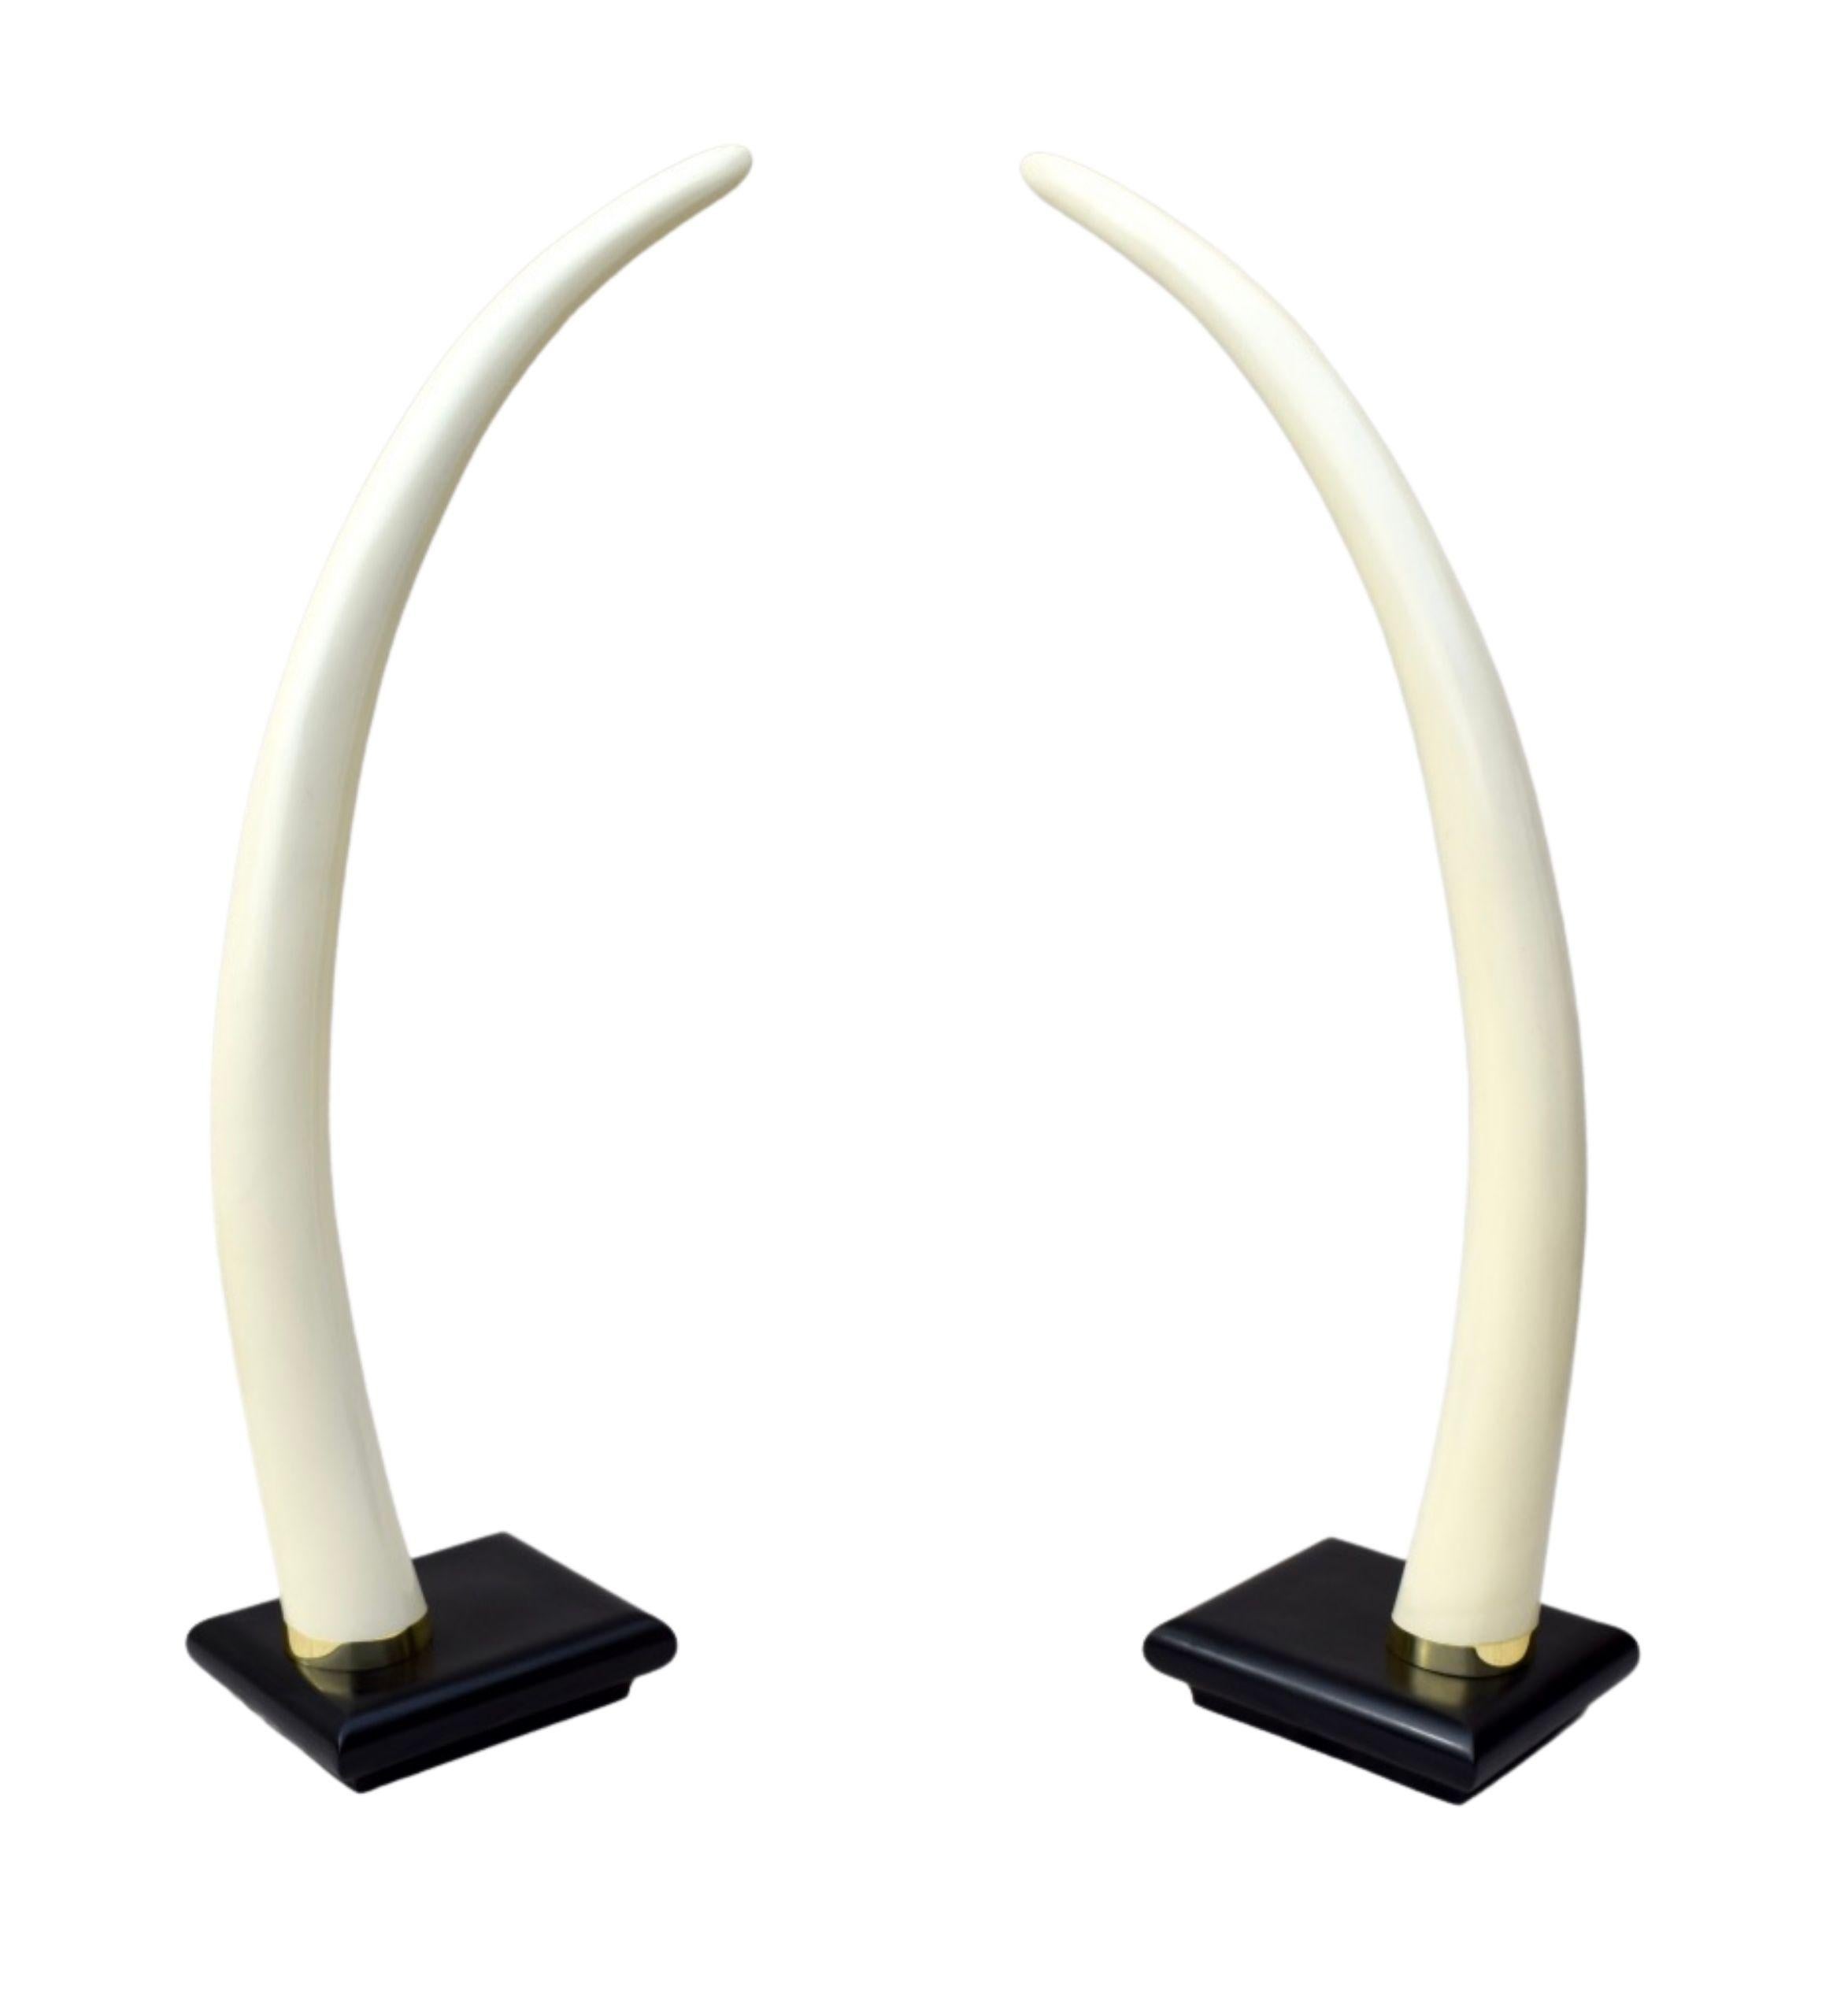 Impressive pair of Mid-Century Modern faux tusks of arched monumental form on lacquered wood bases, enhanced with brass collar mounts; circa 1970s. Base dimensions: 18